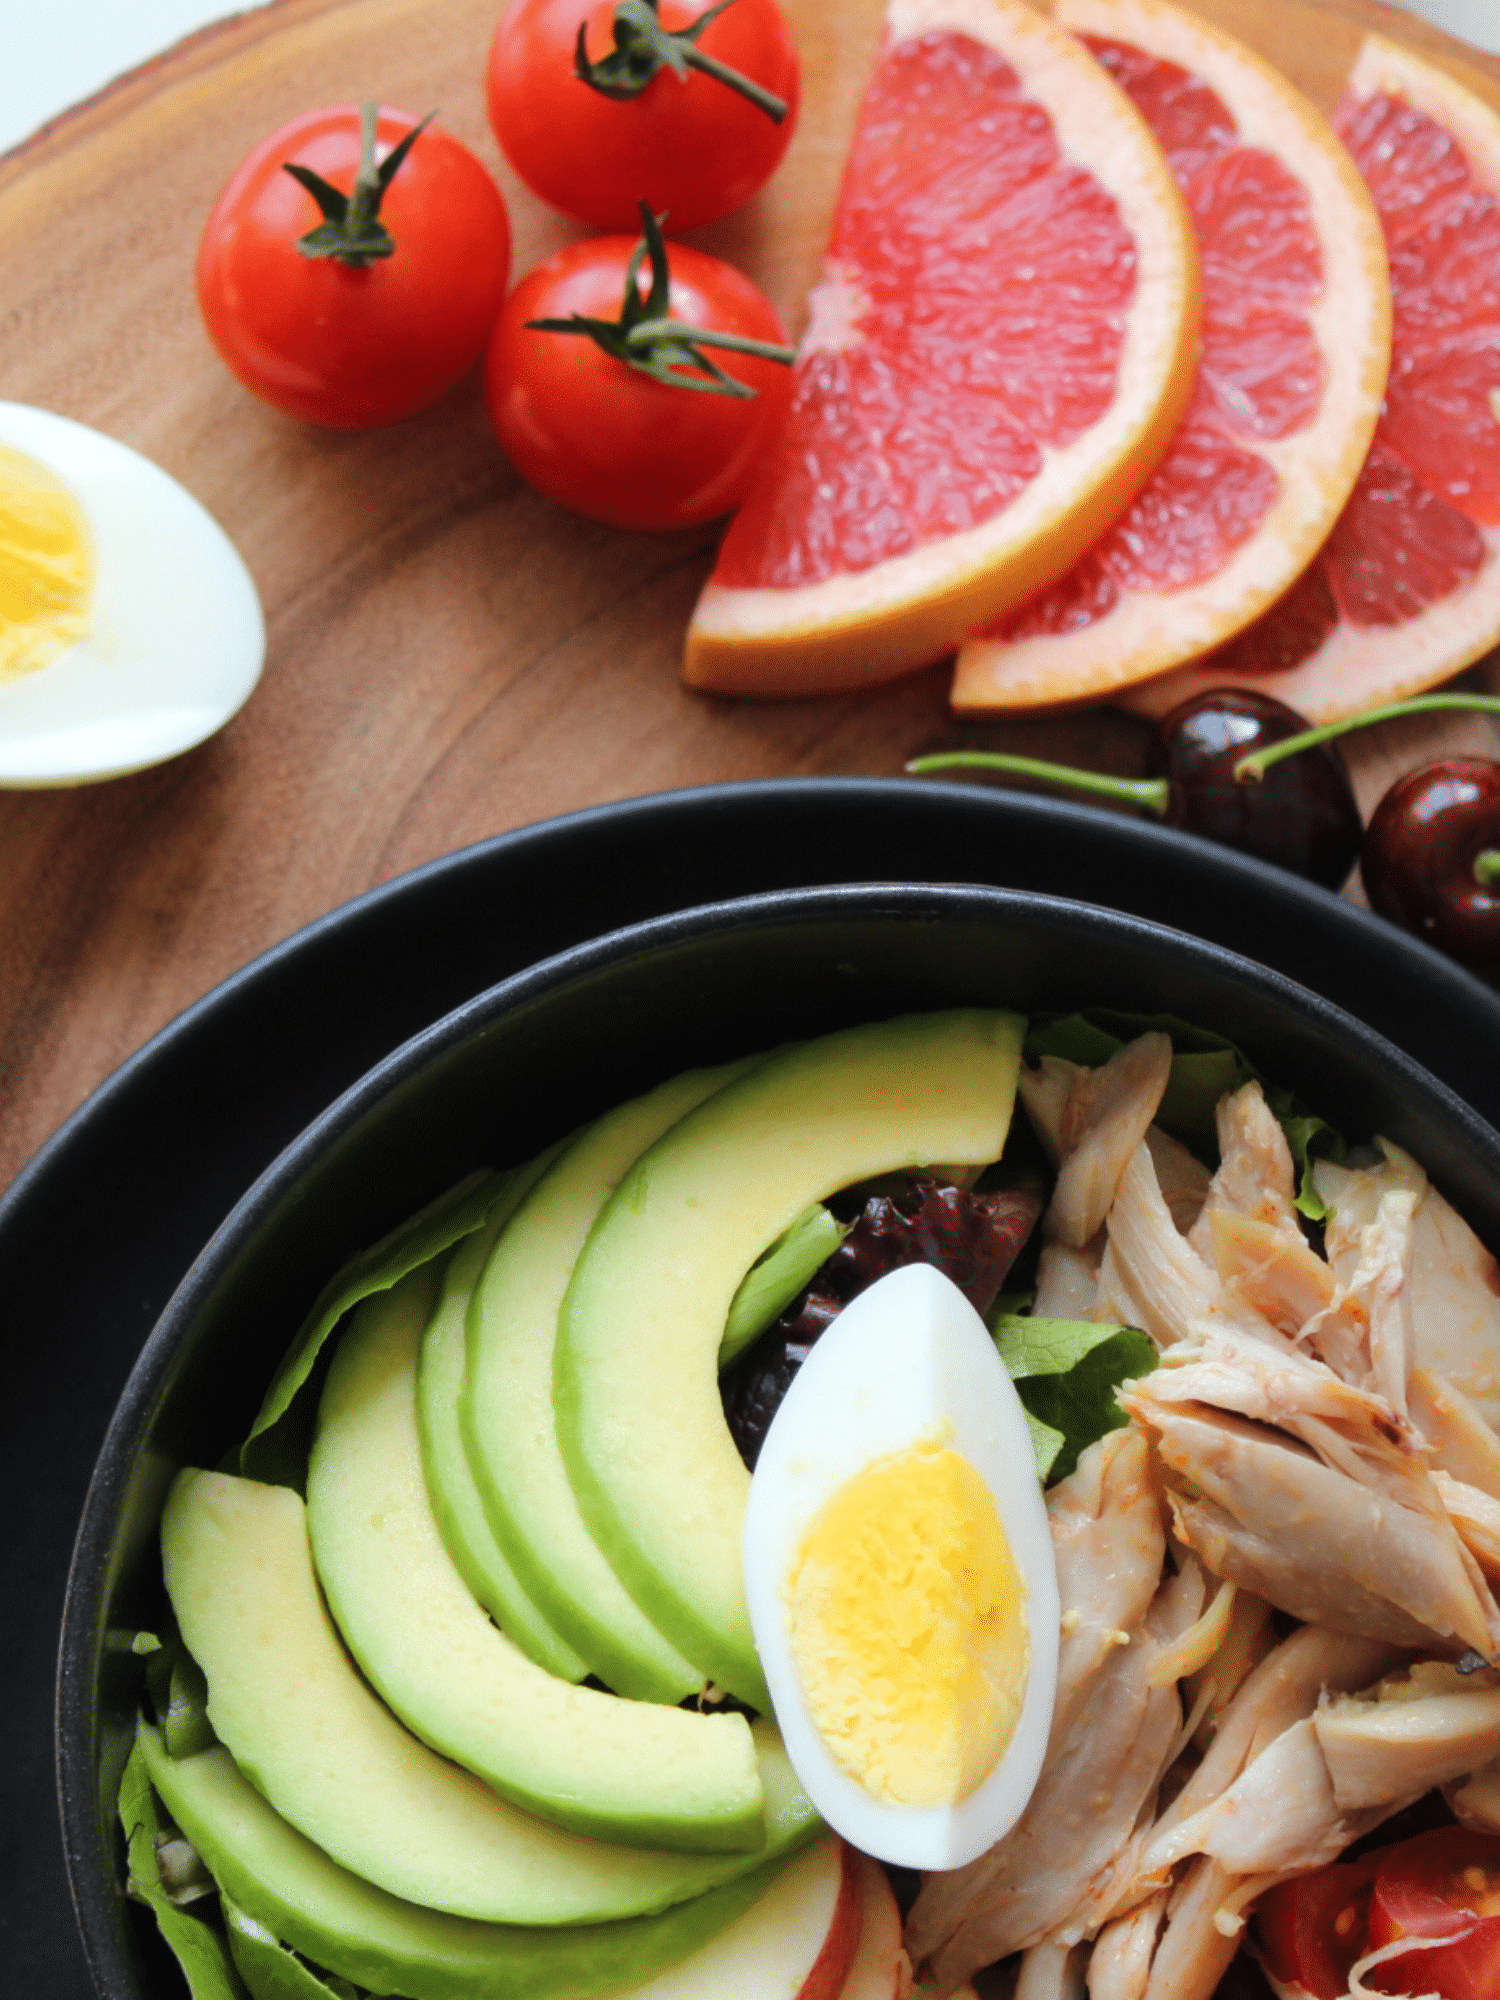 bowl of shredded chicken with slices of avacado and a slice of boiled egg on a table with sliced grapefruit, cherry tomatoes and half a boiled egg